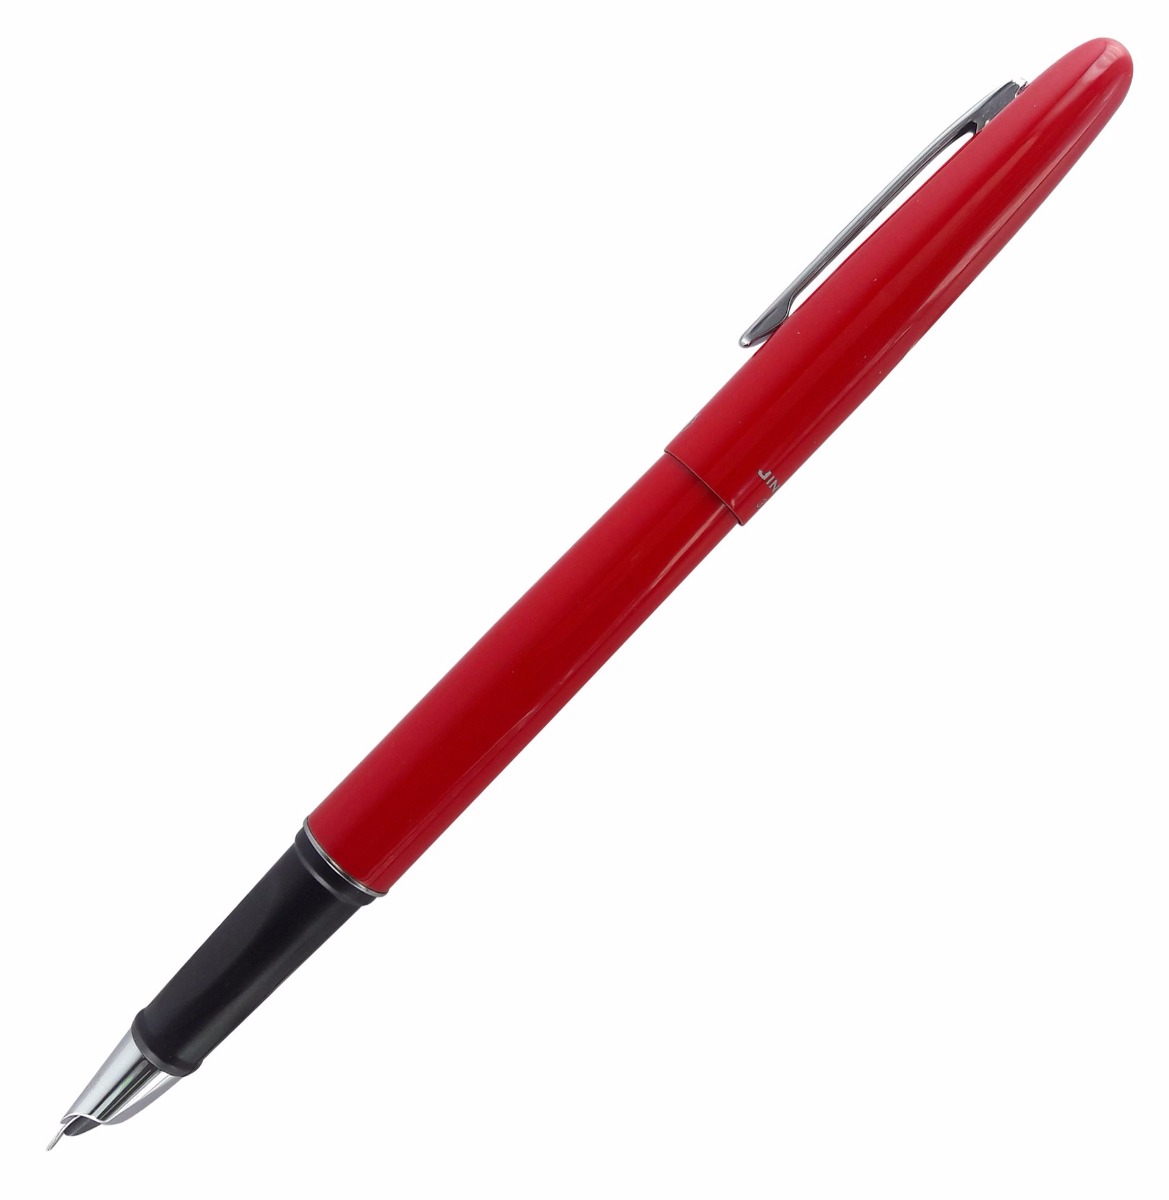 JINHAO 321 – PURE RED COLOR BODY SLIM TYPE WITH SILVER CLIP FOUNTAIN PEN MODEL: 11656